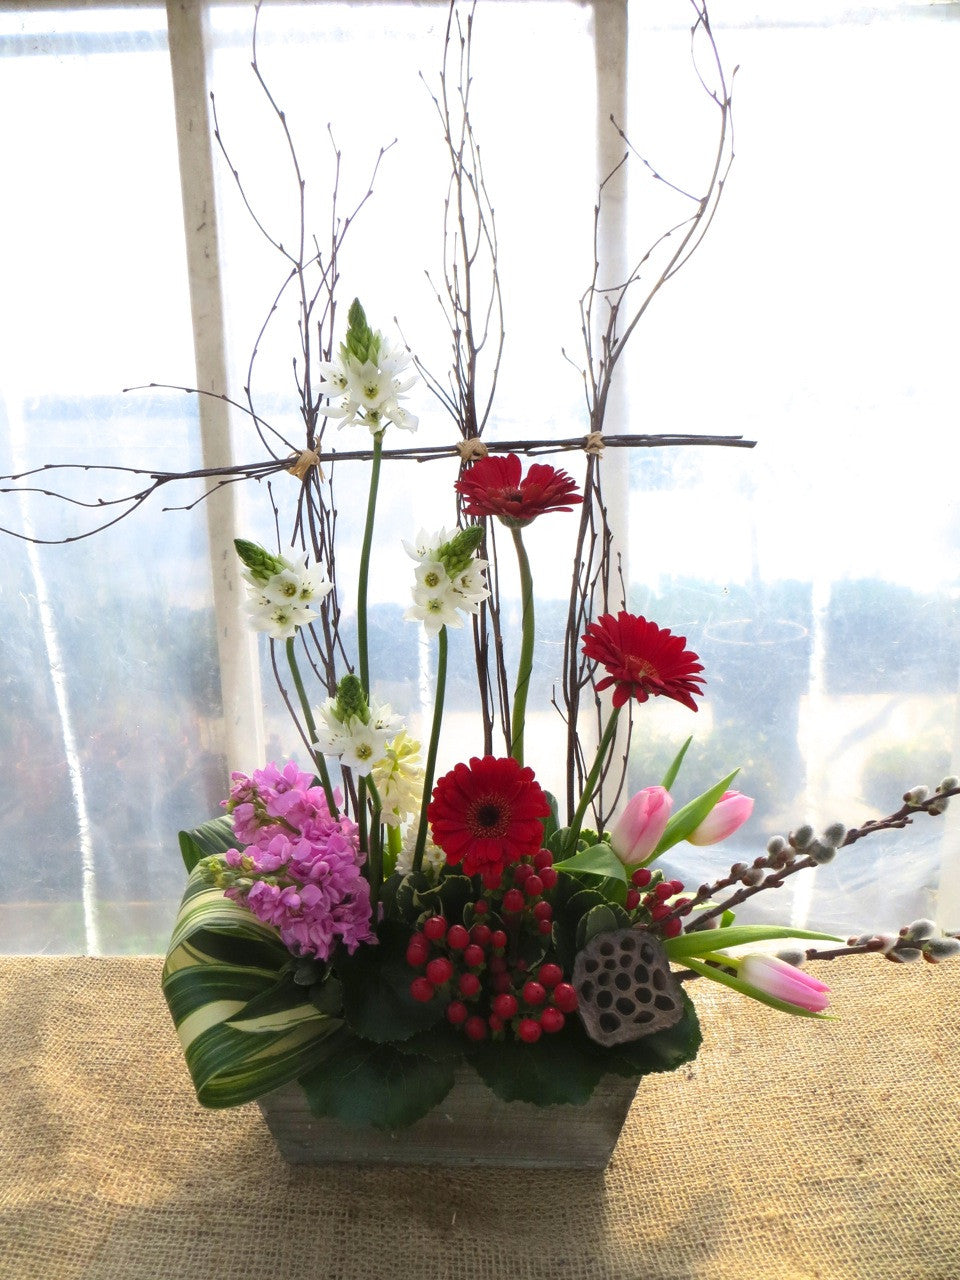 Garden Flower Box Arrangement with Gerbera Daisies, Star of Bethlehem, and Pussy Willow | Michler's Florist 